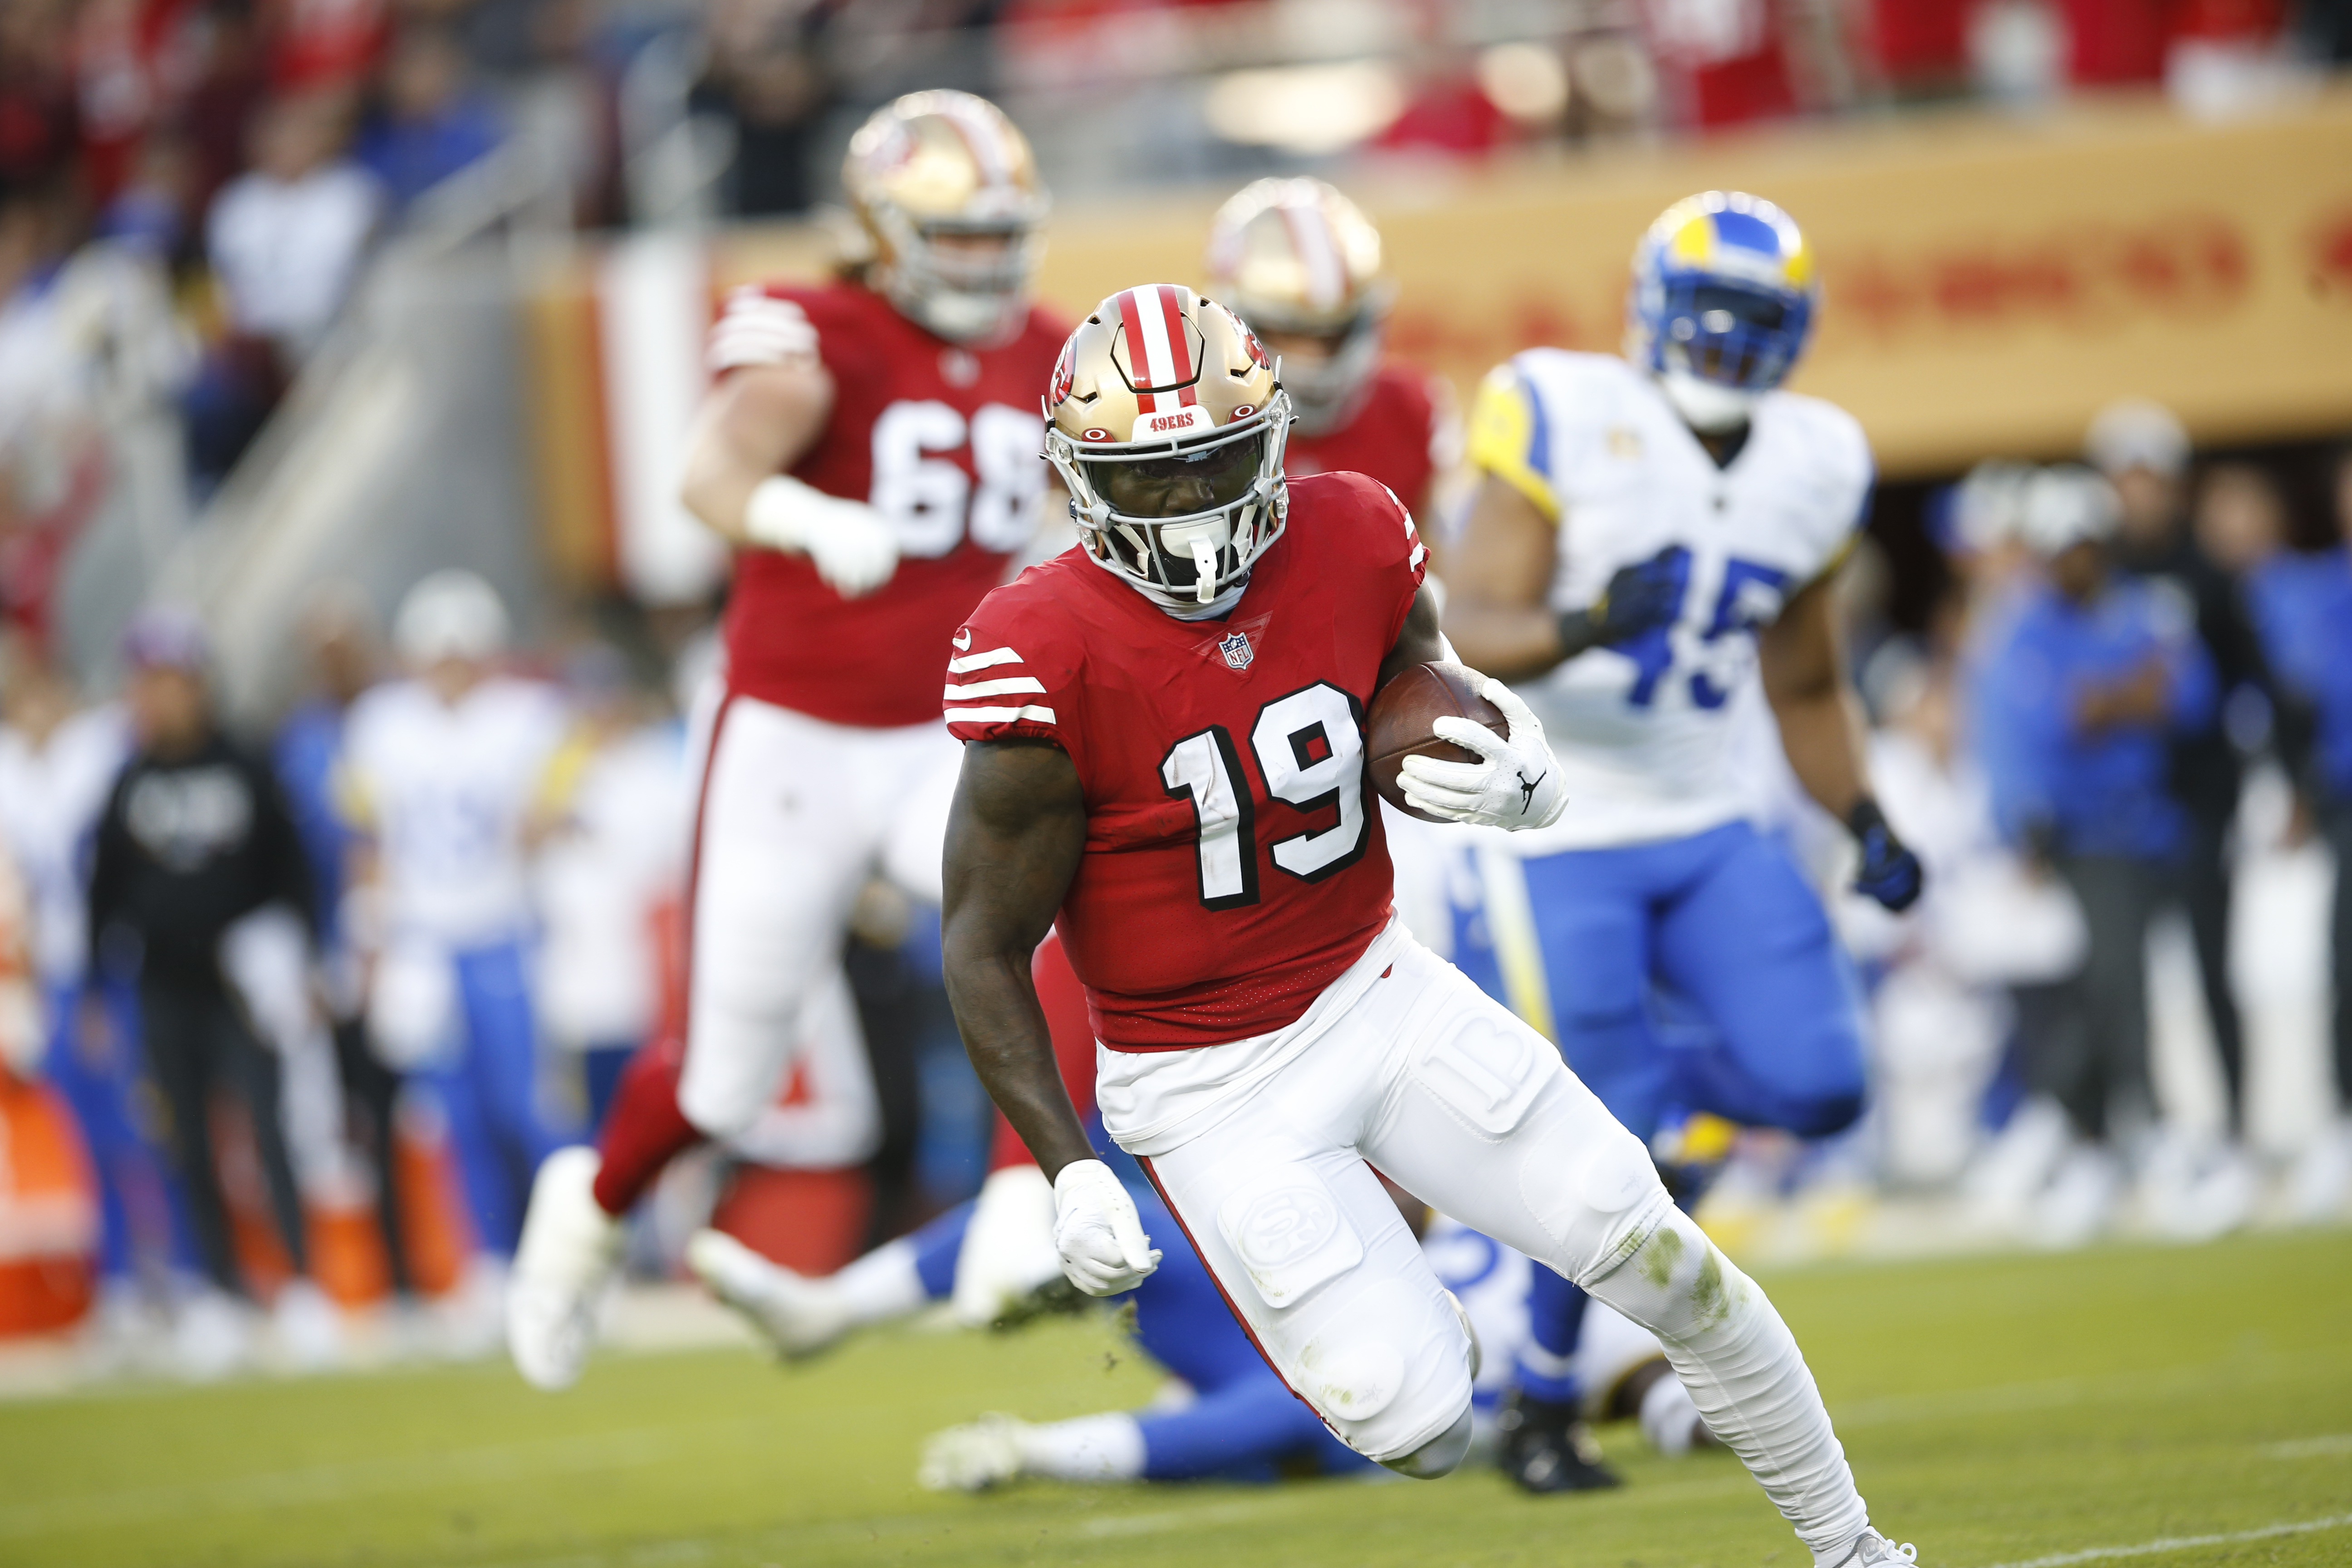 SANTA CLARA, CA - OCTOBER 3: Deebo Samuel #19 of the San Francisco 49ers heads to the end zone on a 57-yard touchdown catch during the game against the Los Angeles Rams at Levi’s Stadium on October 3, 2022 in Santa Clara, California. The 49ers defeated the Rams 24-9.